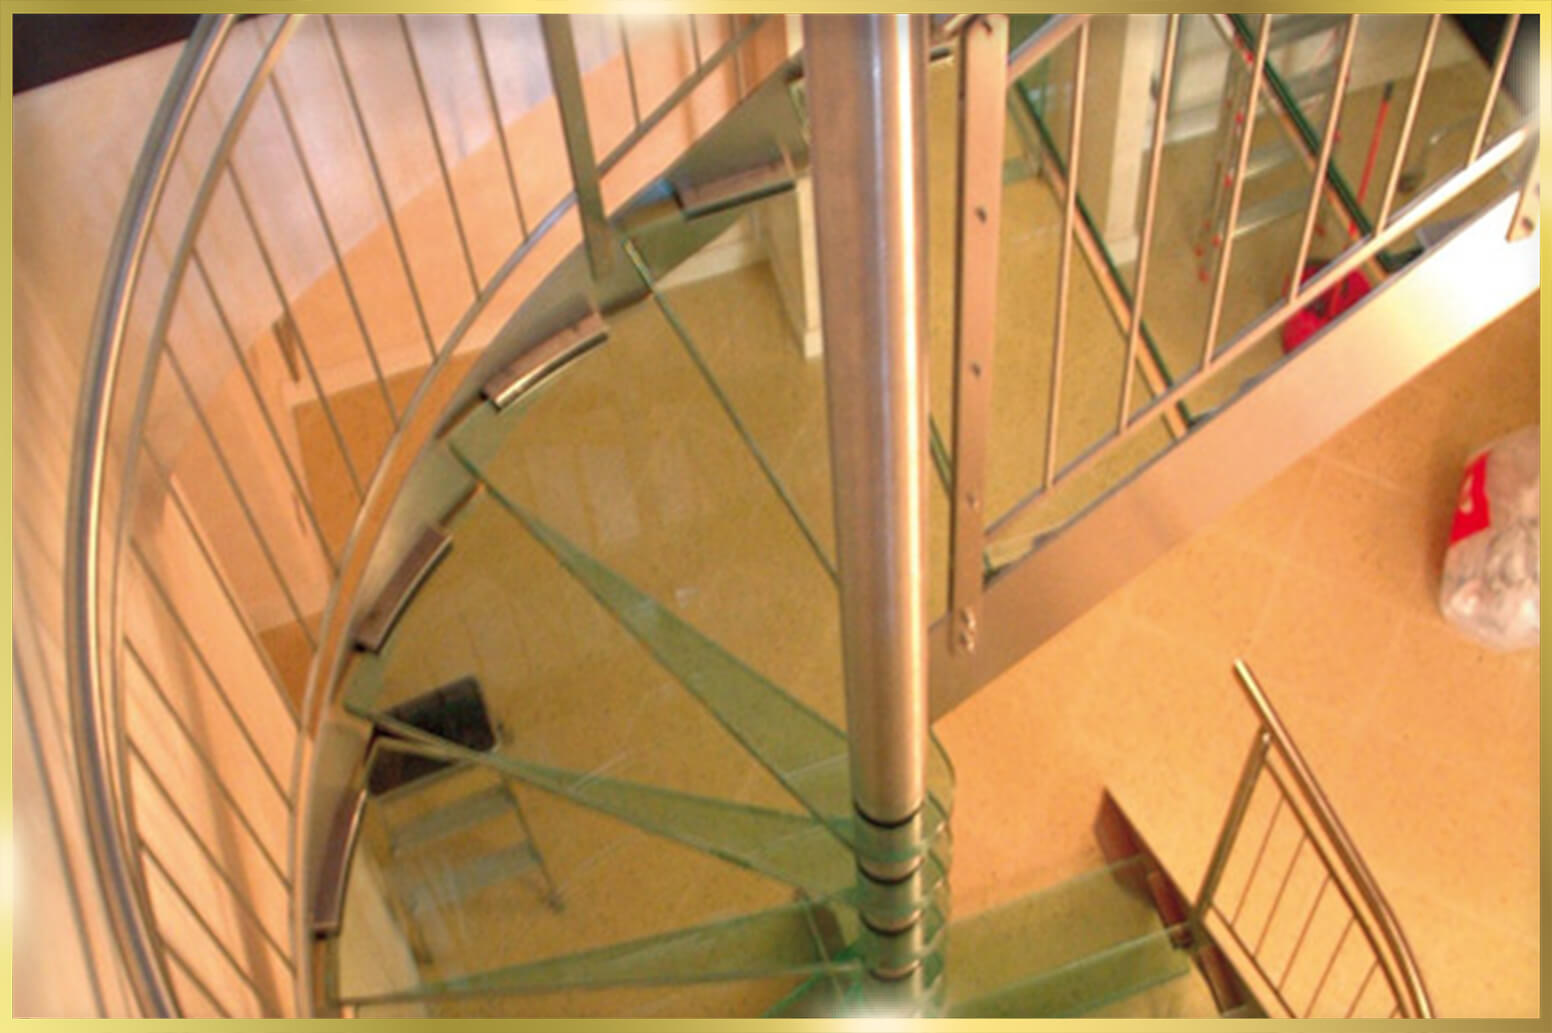 Stainless Steel Staircase Manufacturers in Dubai